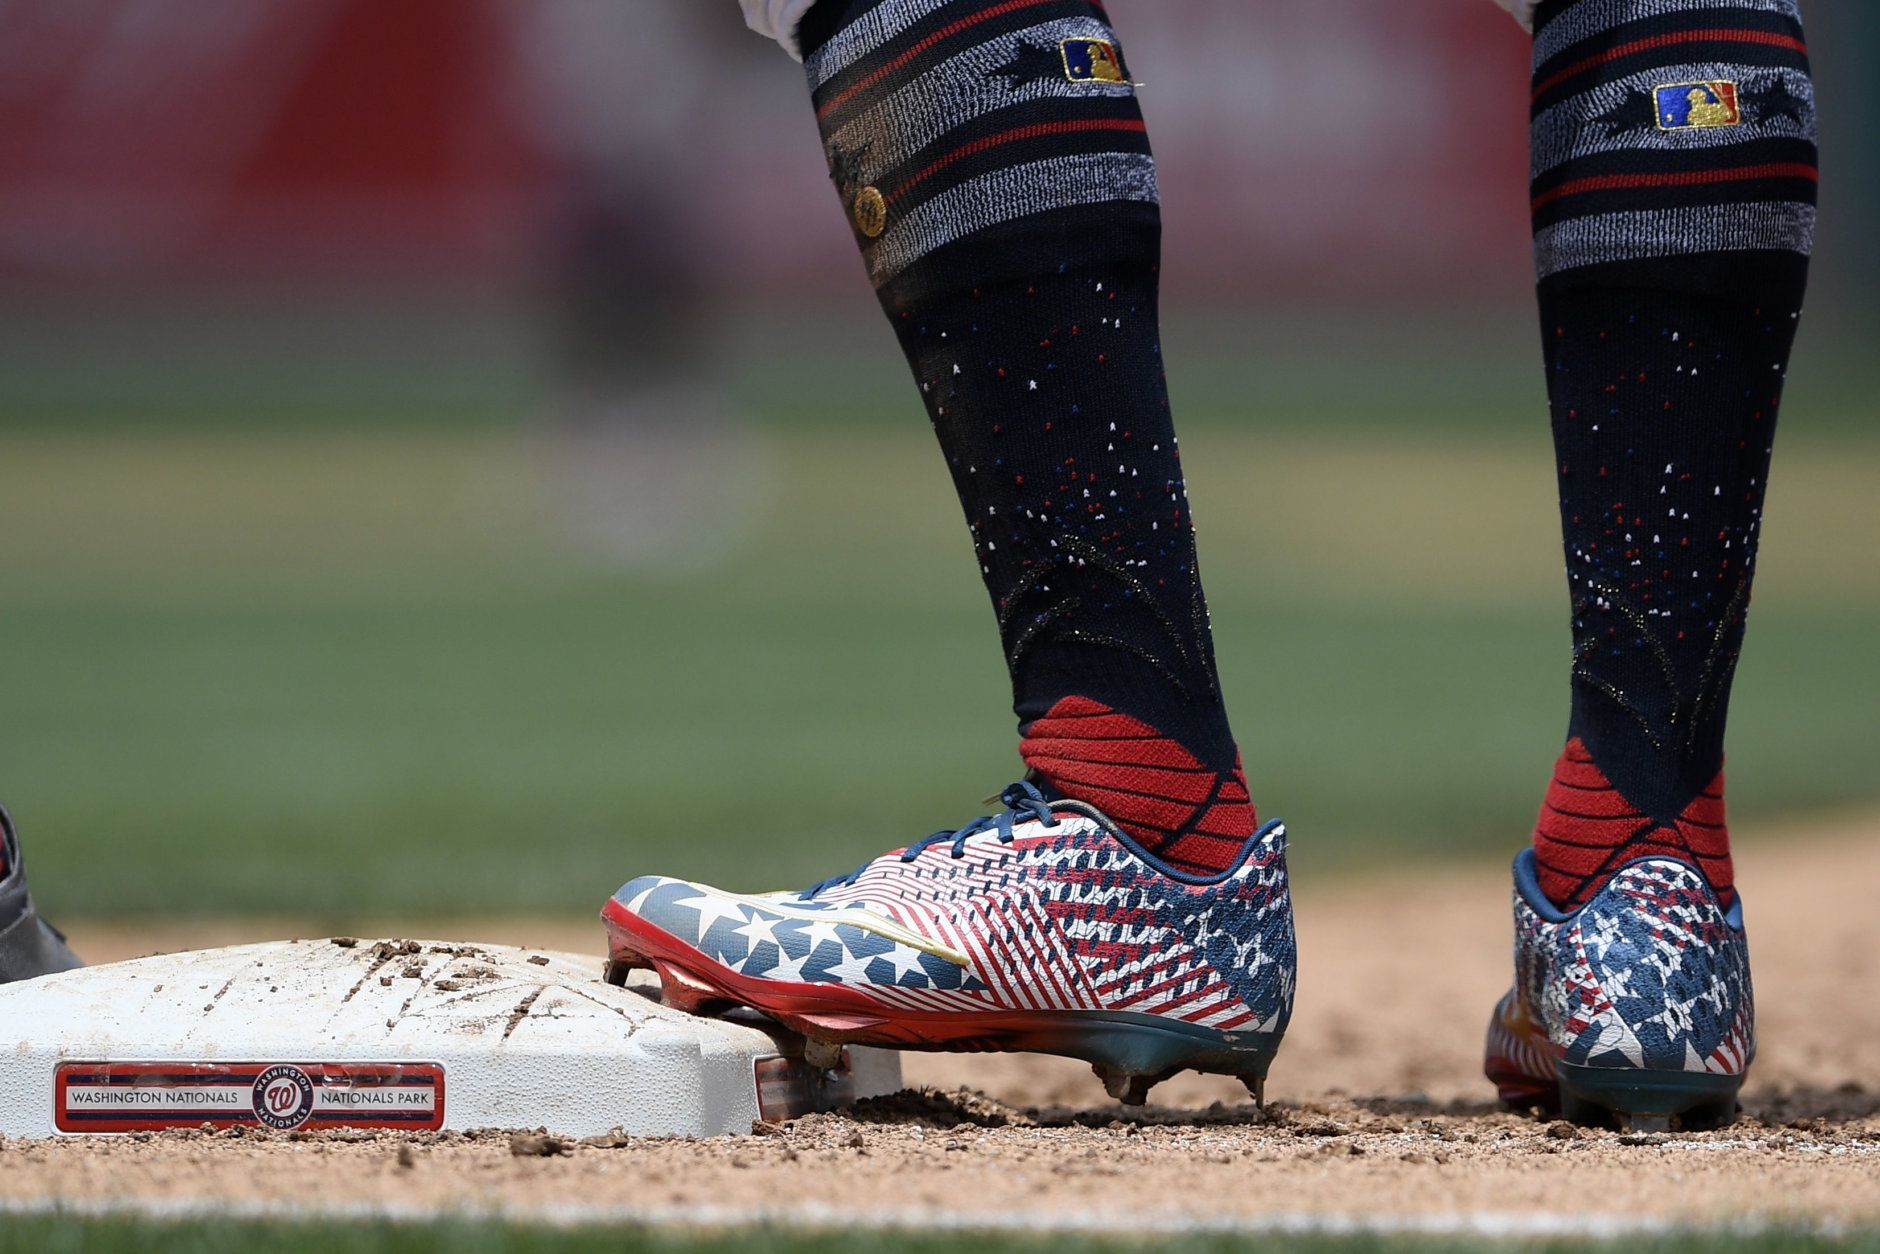 Washington Nationals' Victor Robles, right, stands on first wearing patriotic themed cleats during the sixth inning of a baseball game against the Miami Marlins, Thursday, July 4, 2019, in Washington. The Nationals won 5-2.(AP Photo/Nick Wass)